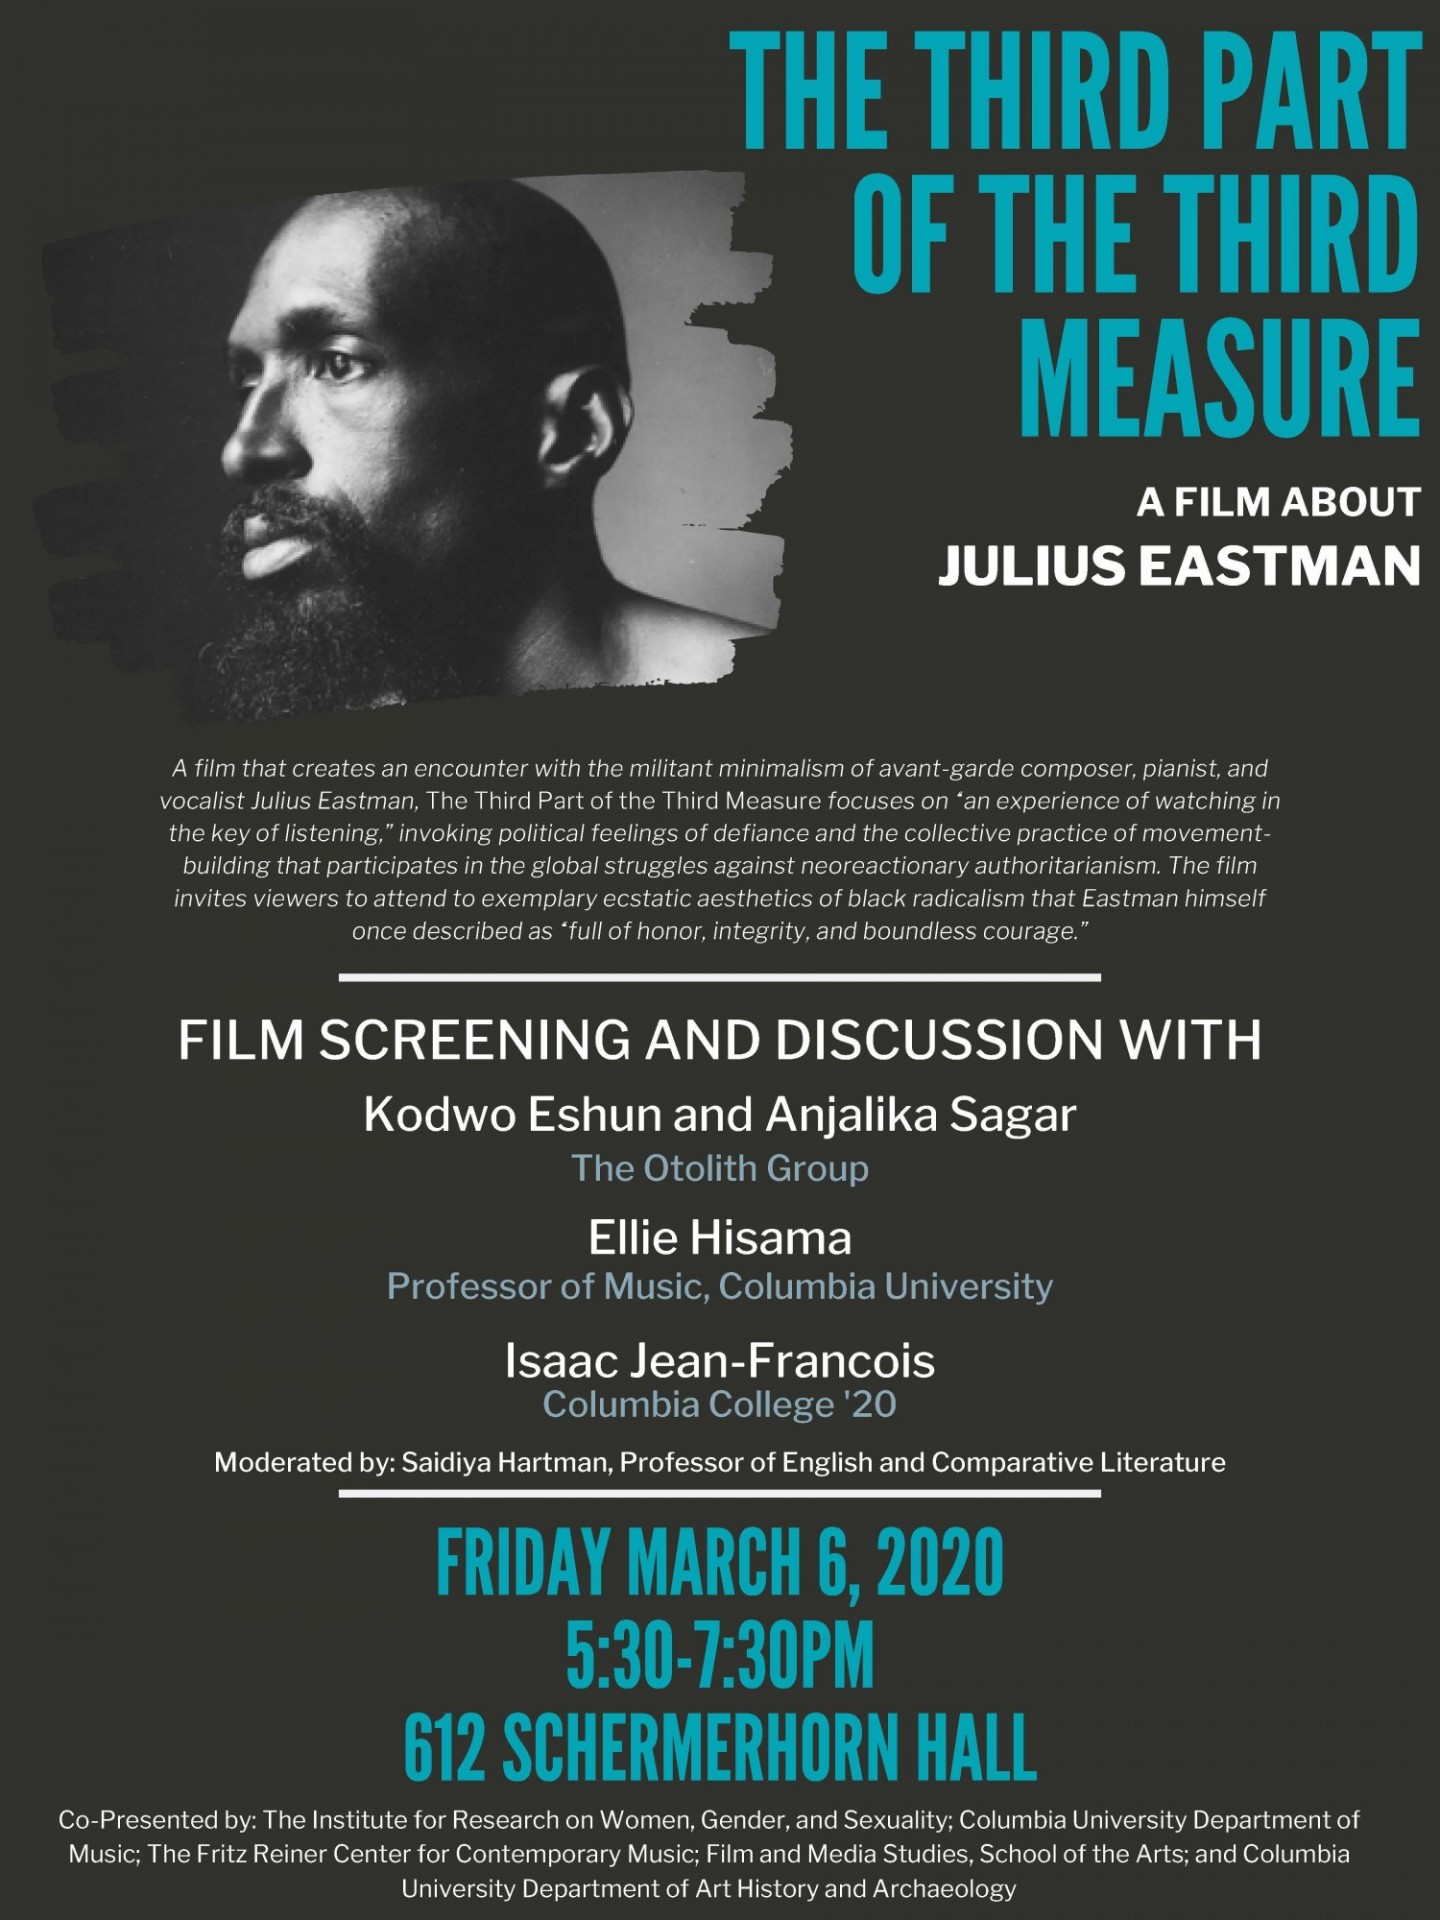 Poster for Film Screening and Discussion of The Third Part of the Third Measure, a film about Julius Eastman